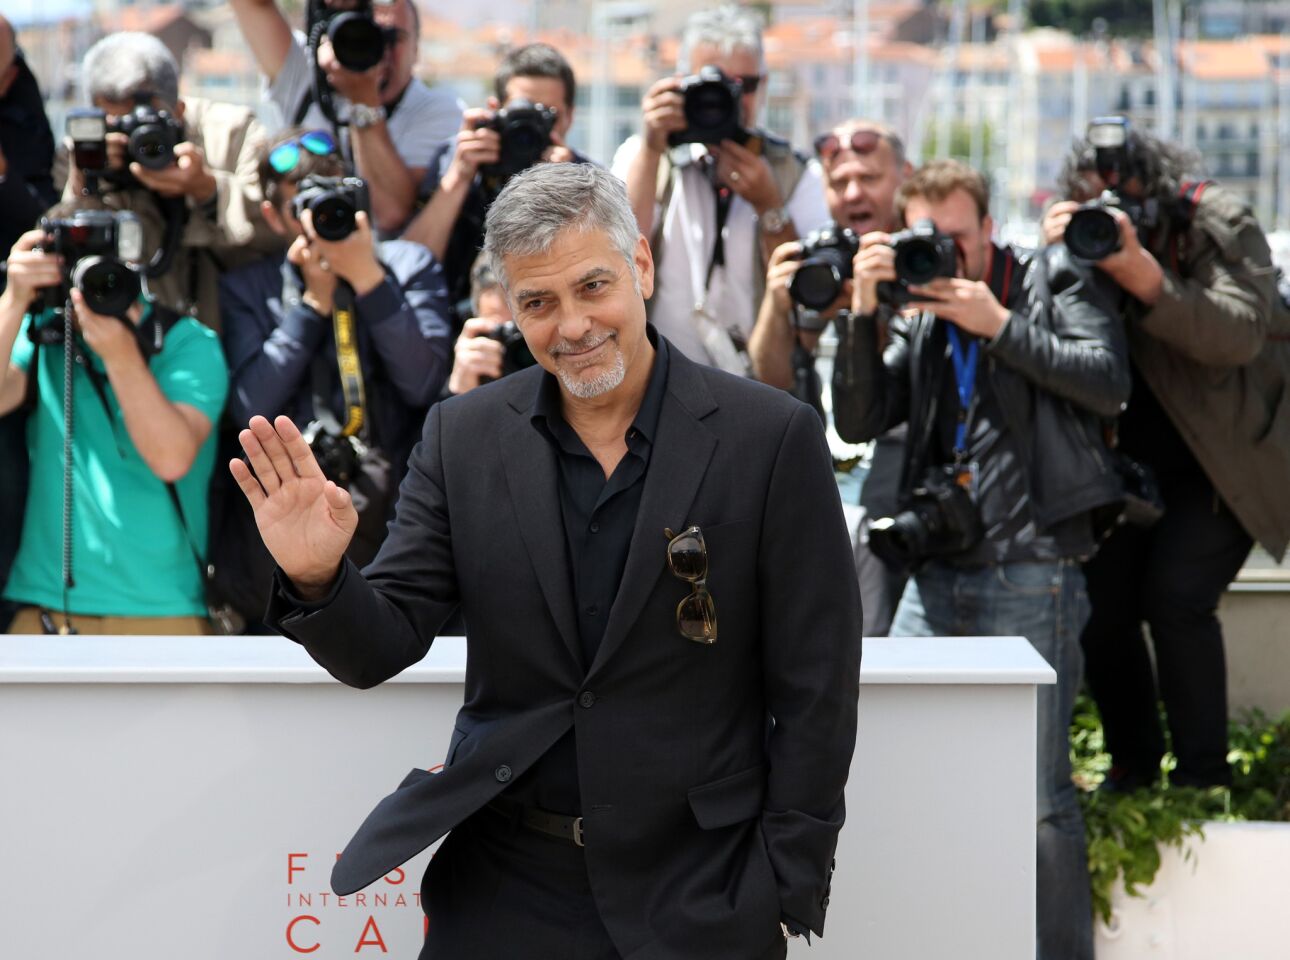 George Clooney of "Money Monster" waves to photographers at the Cannes Film Festival.